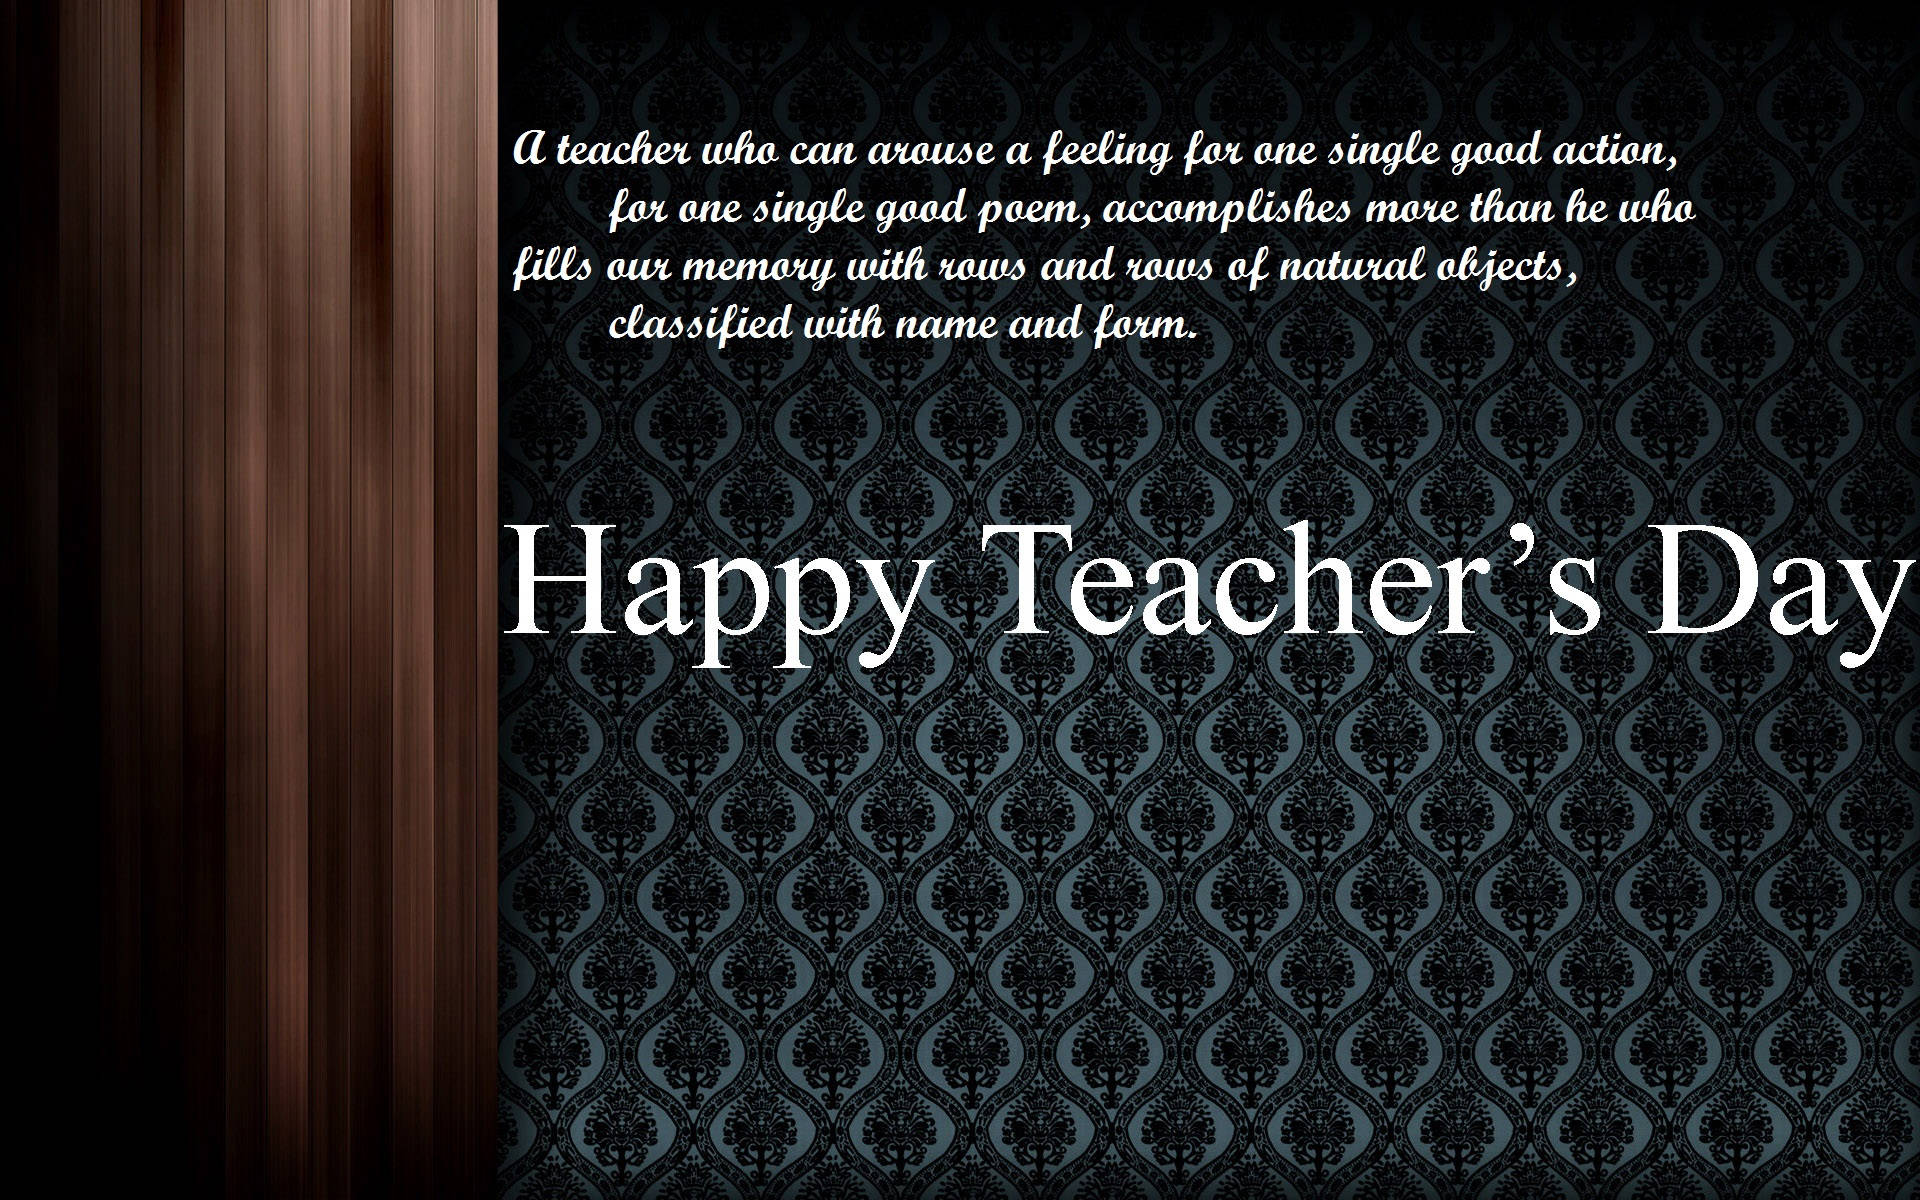 Happy Teachers' Day Good Action Background